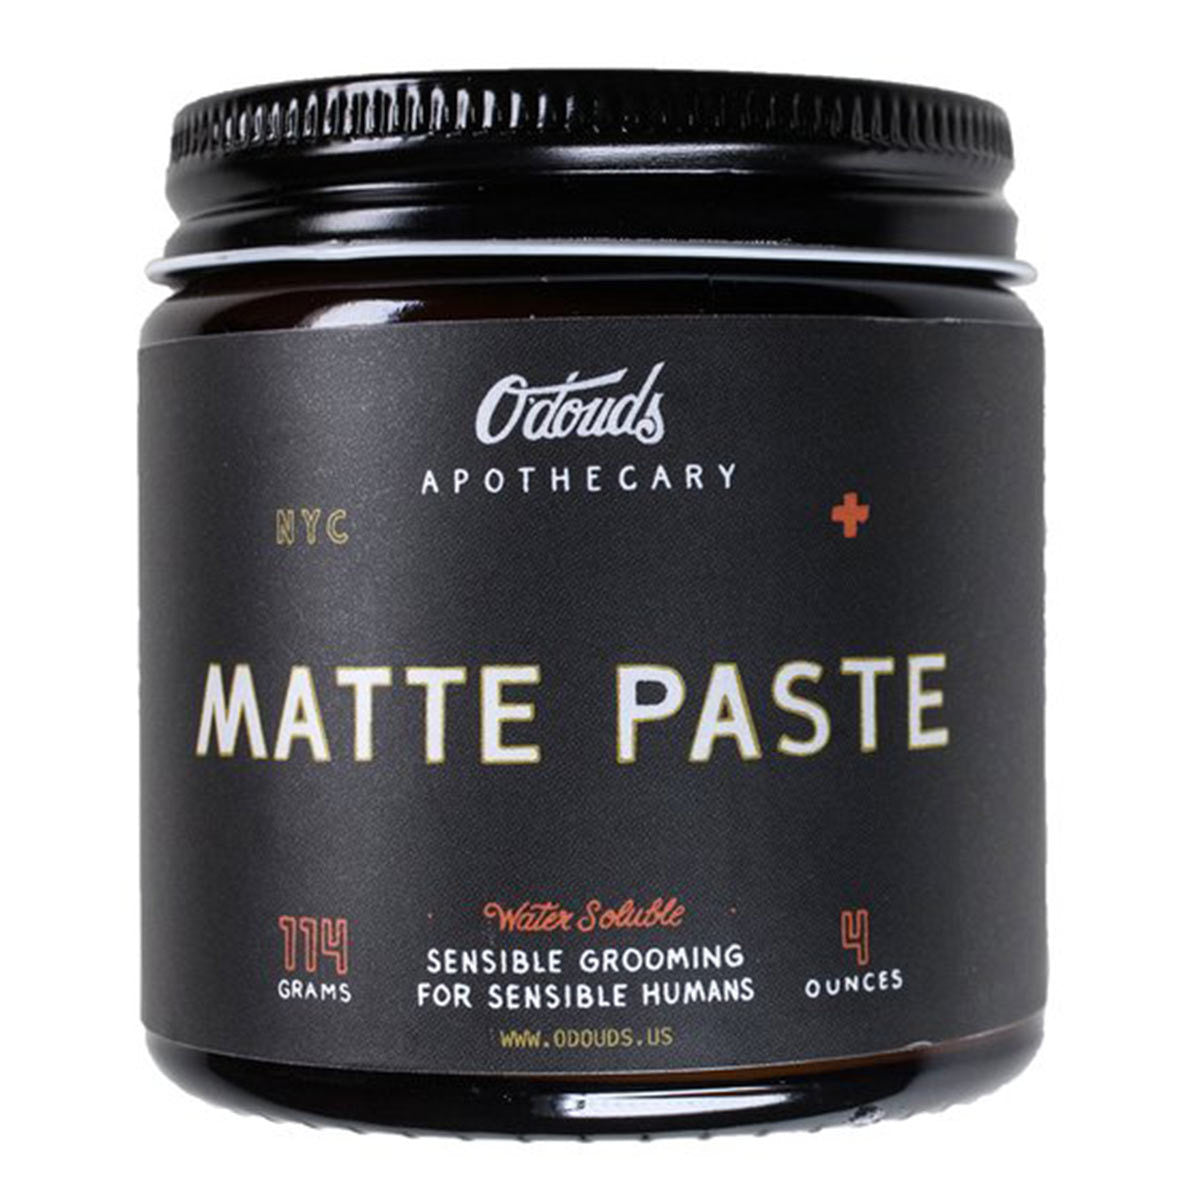 Primary image of Matte Paste Pomade